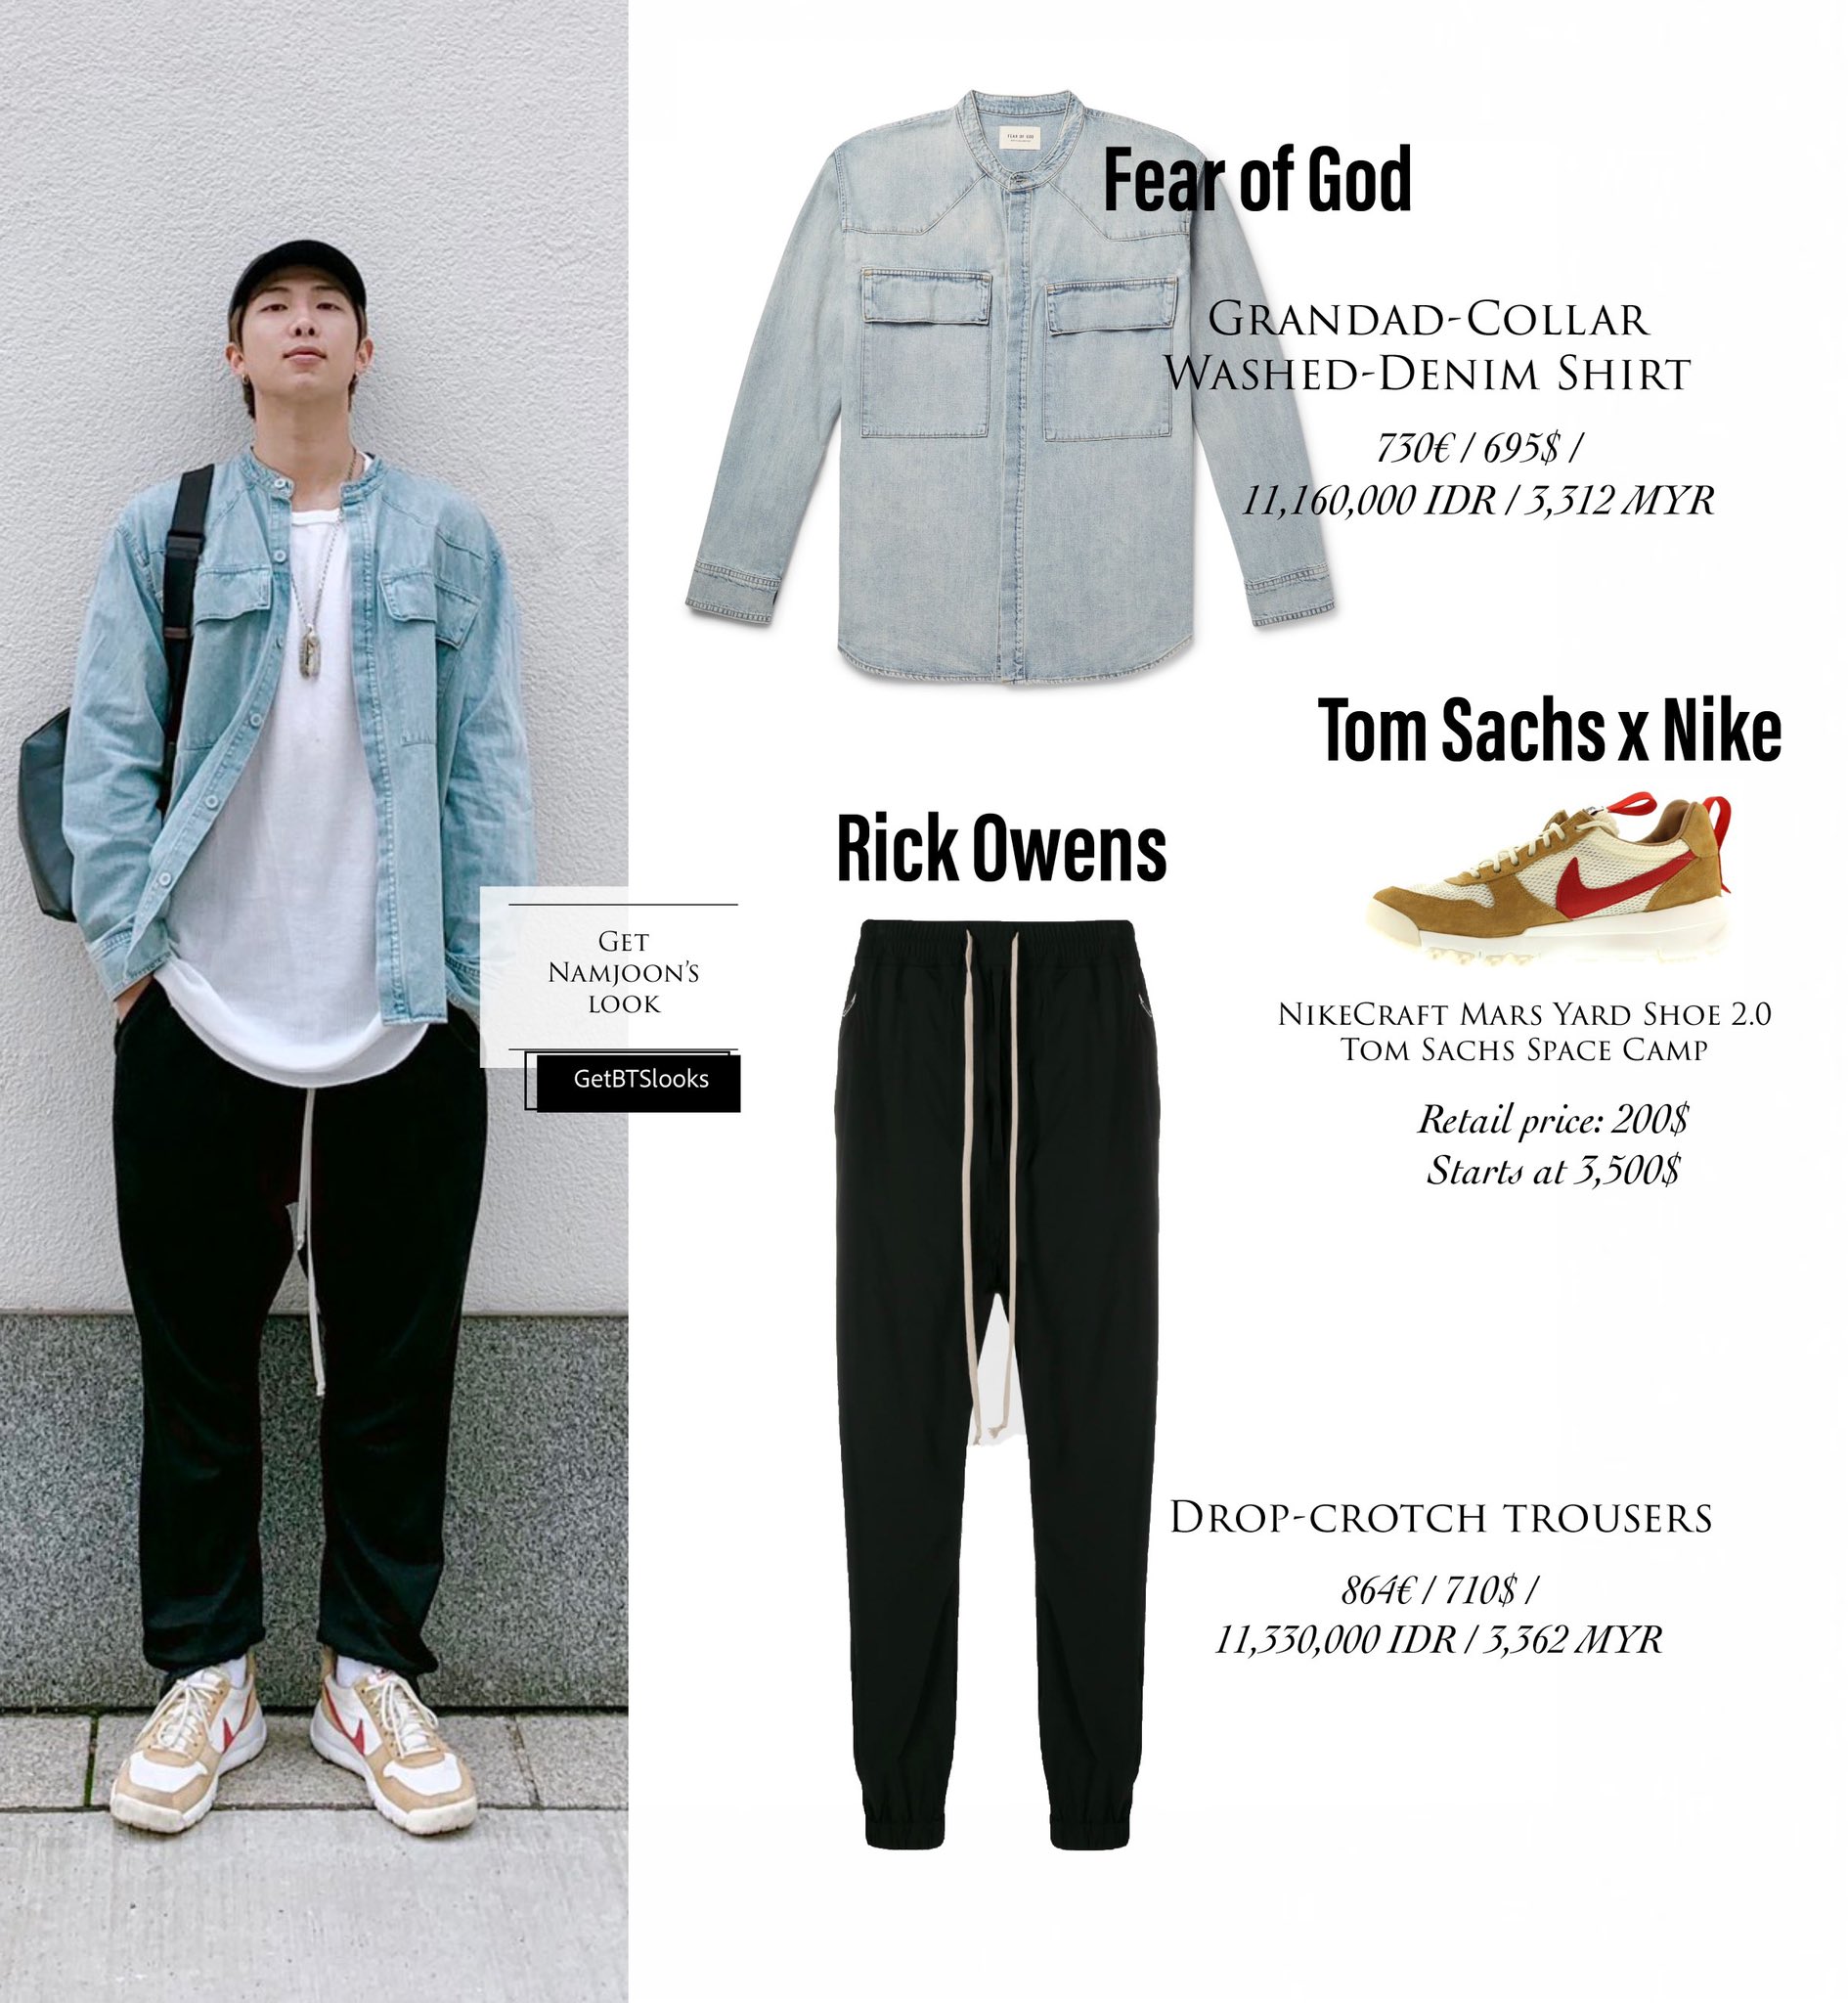 GetBTSlooks on Twitter: "REQUESTED - Namjoon - post 04092019 - Wearing of God denim shirt with Rick Owens and Tom Sachs x Nike collaboration #NAMJOON #BTS https://t.co/P97eZXuO81" / Twitter